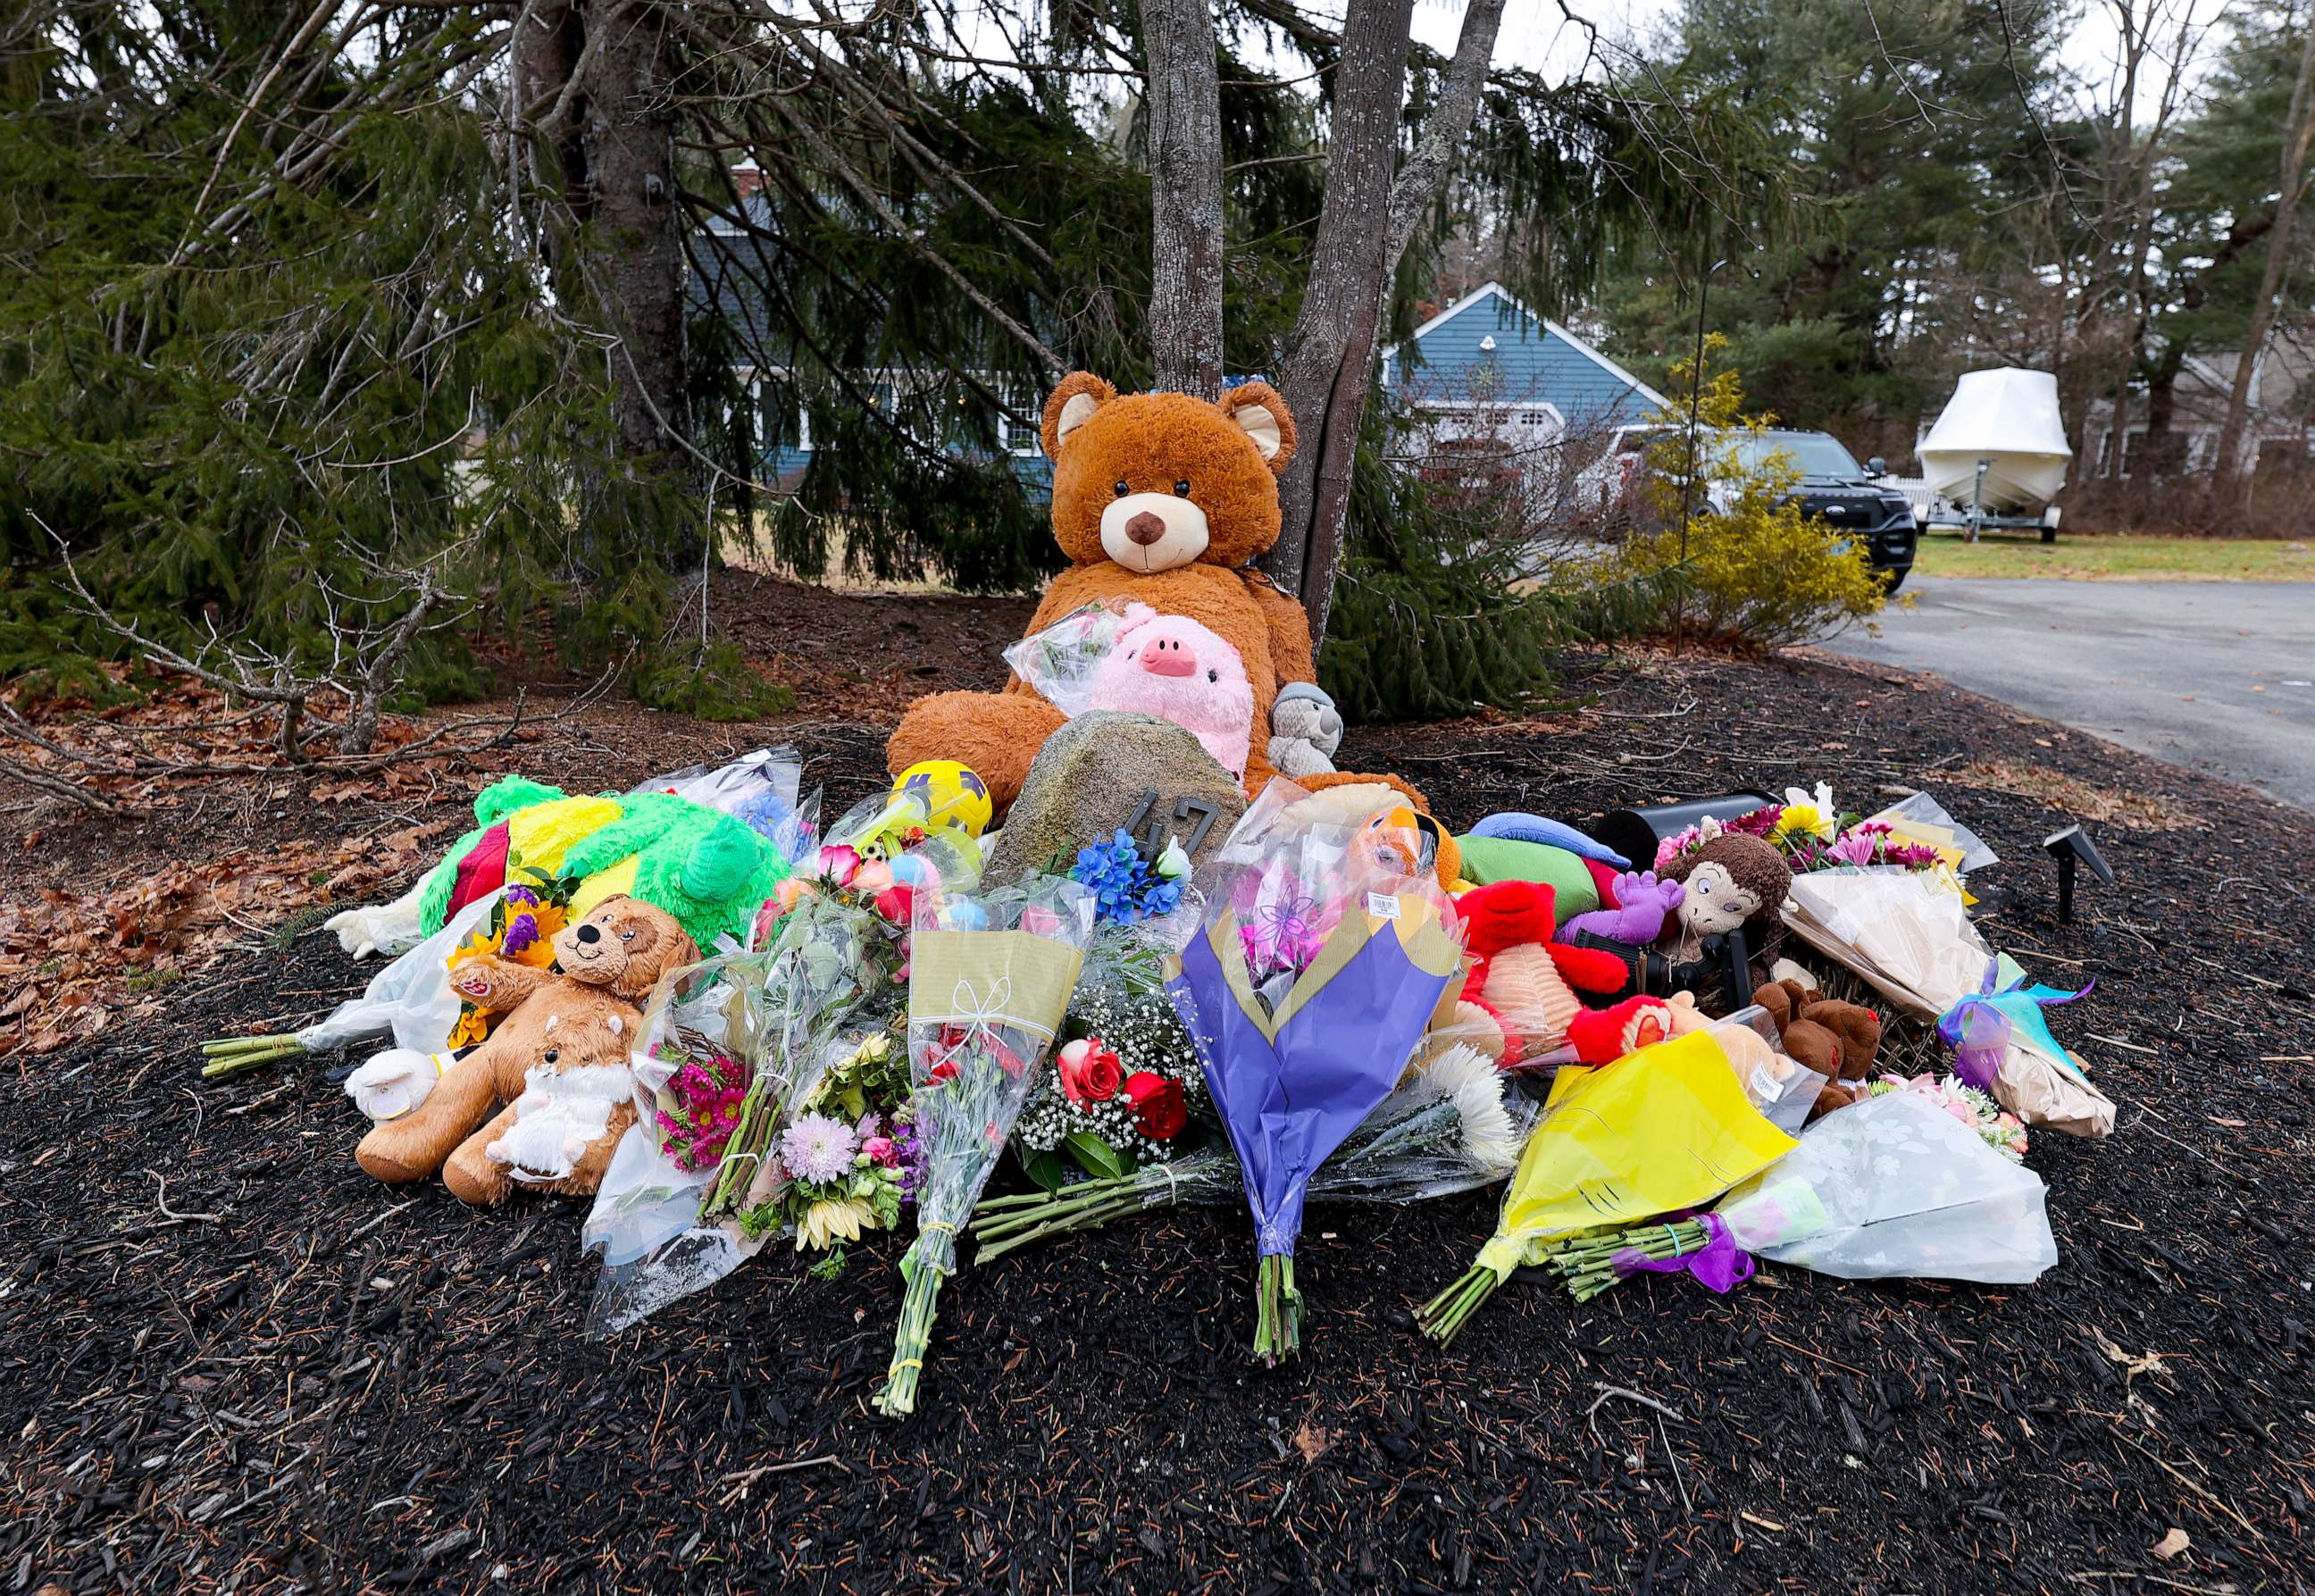 PHOTO: A makeshift memorial is set up outside the home at 47 Summer street where Lindsay M. Clancy allegedly killed two of her young children and seriously injured her infant son before jumping out a second-story window.